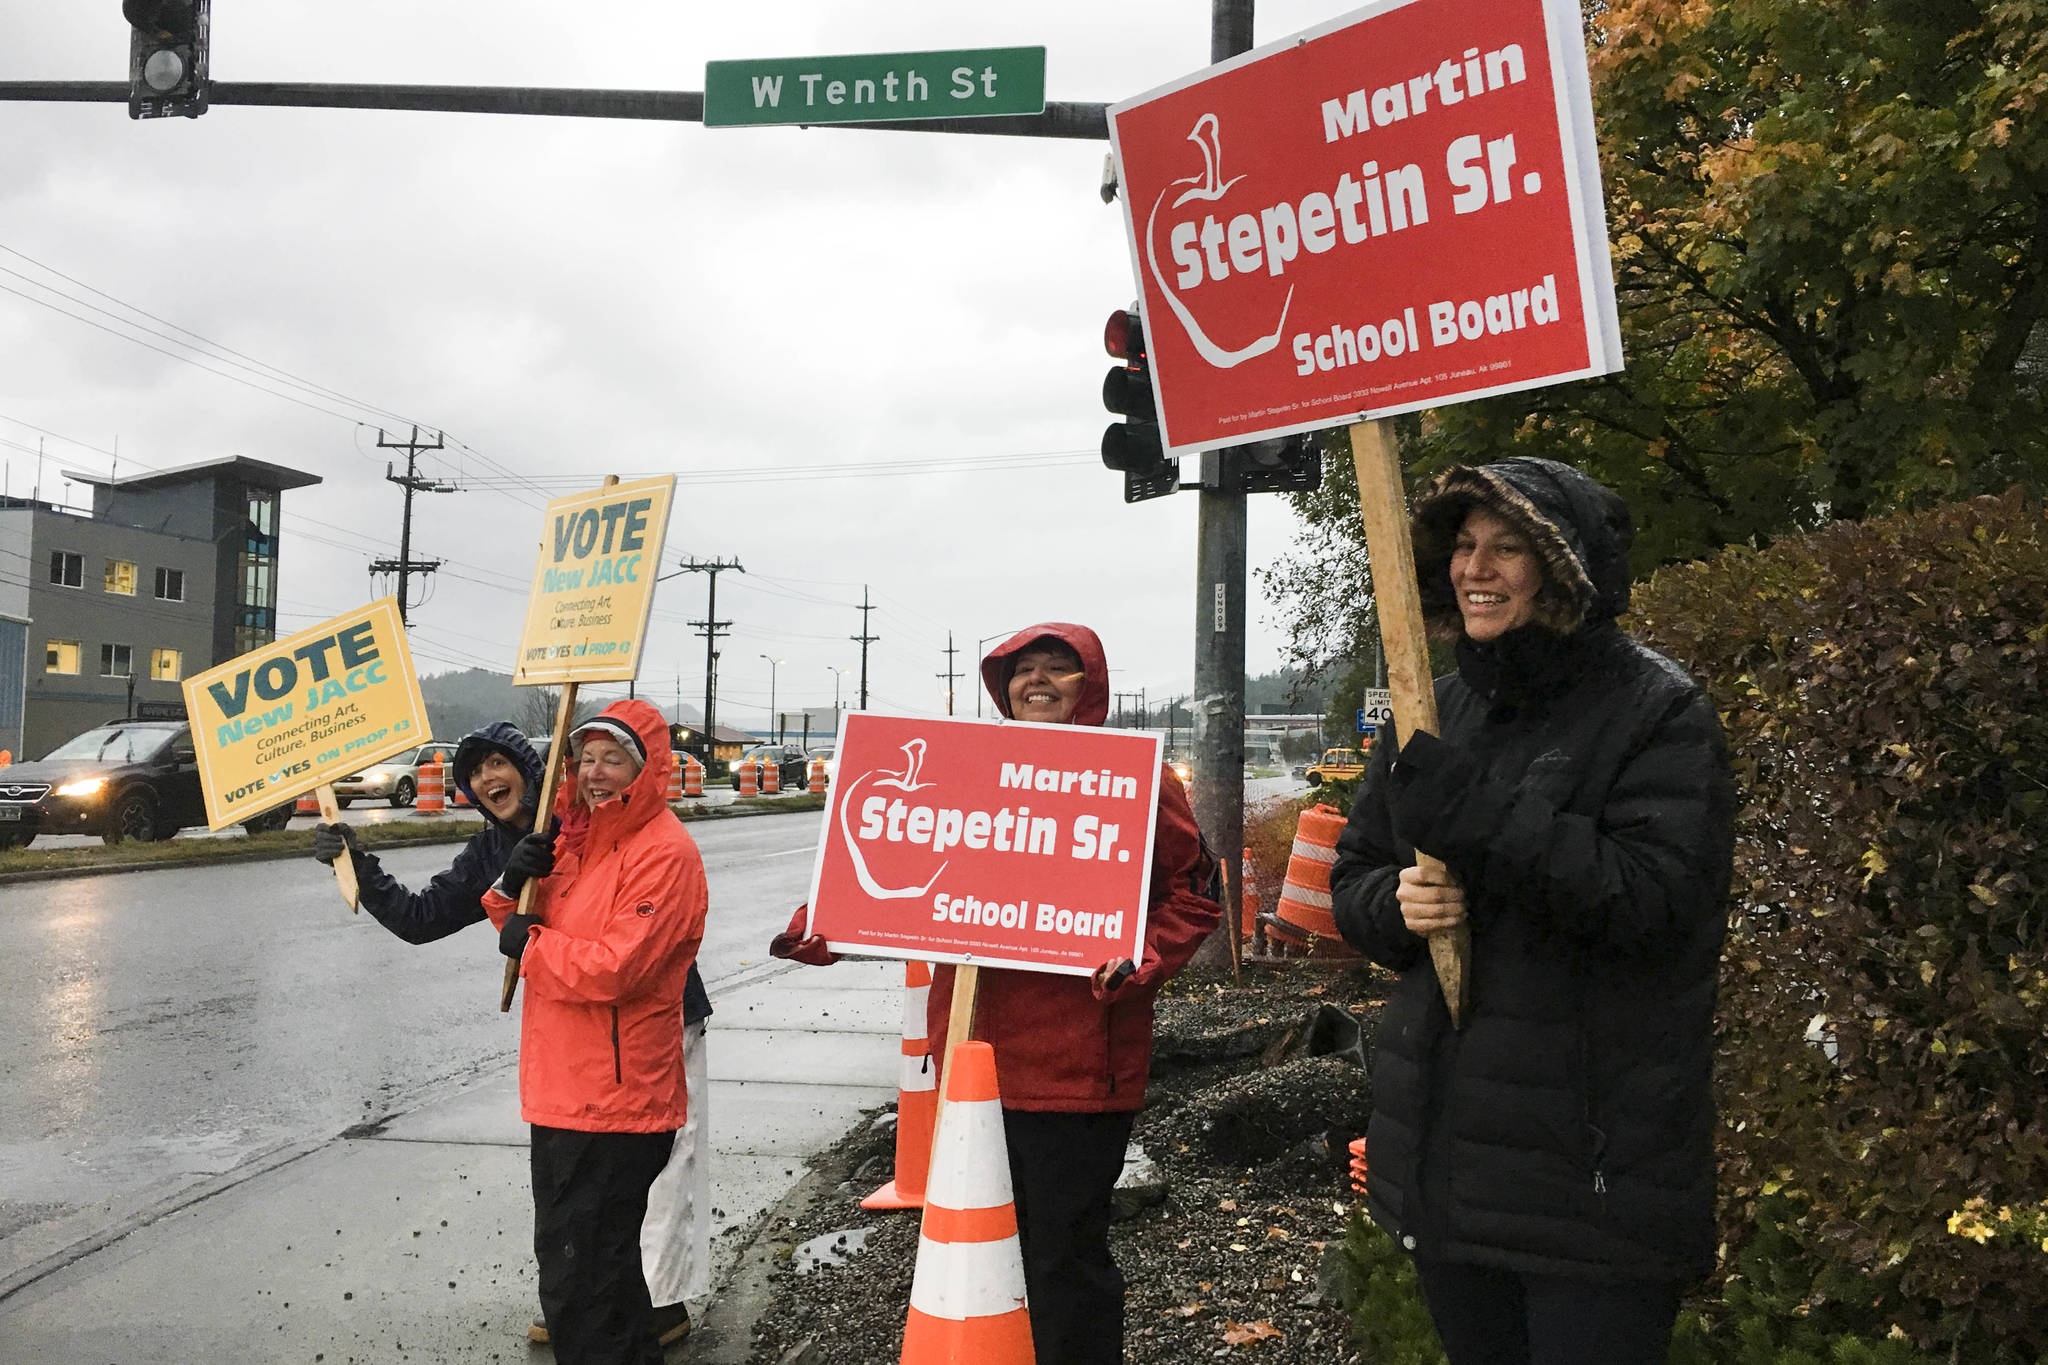 Supporters of Martin Stepetin’s bid for a seat on the school board and Proposition 3 wave signs in the intersection of Egan Drive and the Juneau-Douglas Bridge. Voting is from 7 a.m. to 8 p.m. on Tuesday, Oct. 1, 2019. (Michael S. Lockett | Juneau Empire)